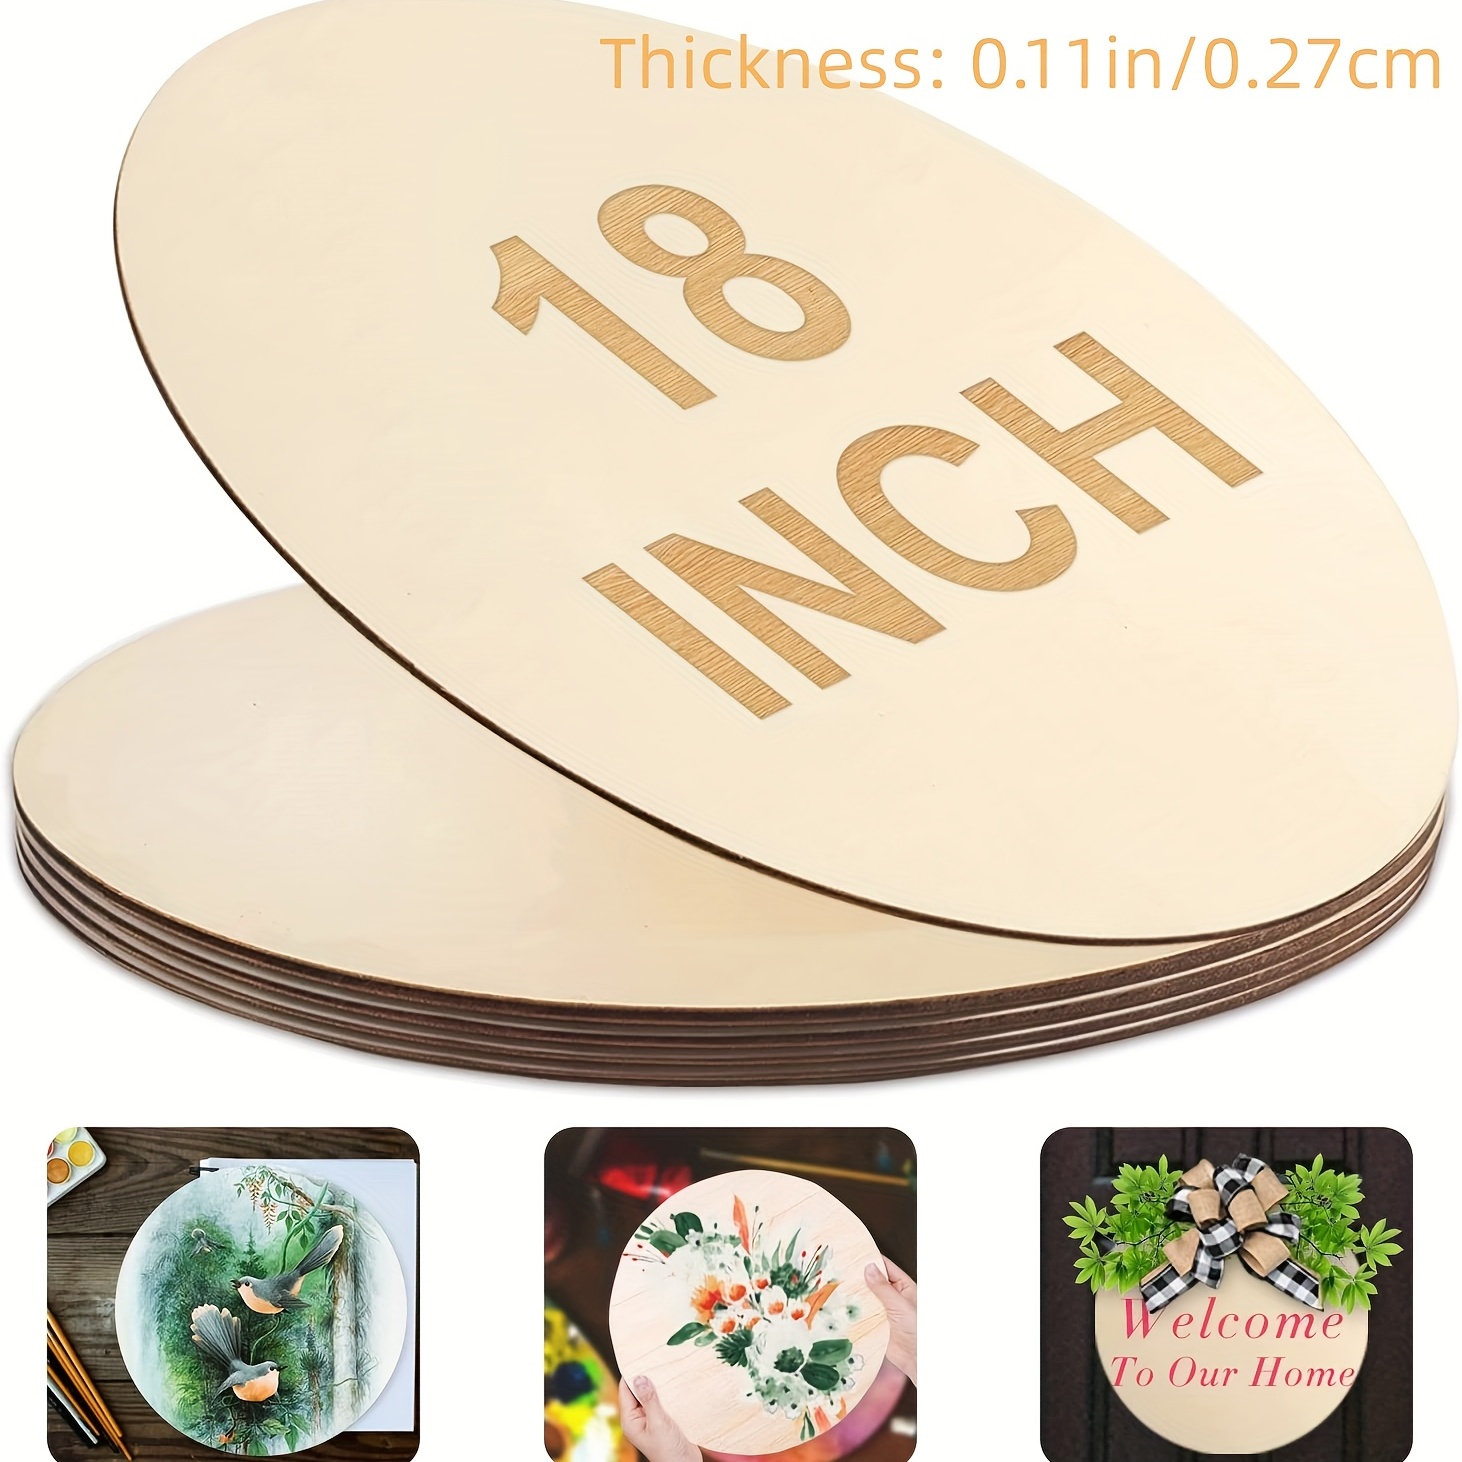 Wood Circles 19 inch, 2 Thicknesses, Unfinished Birch Sign Plaques | Woodpeckers | 1/2 Thick | Michaels